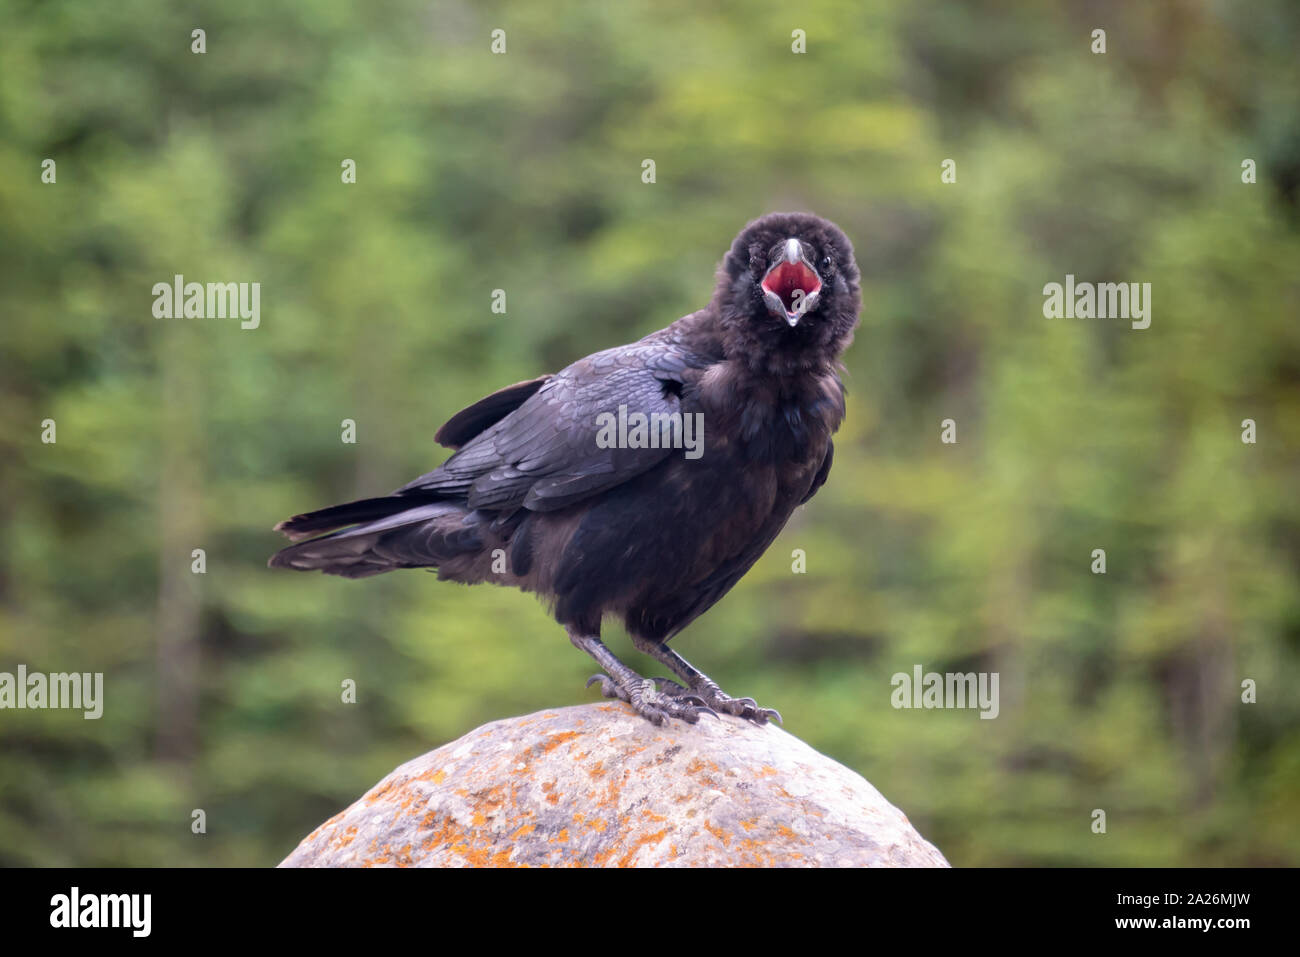 Close up of a common raven (Corvus corax) on a rock calling and looking at the camera, British Columbia, Canada Stock Photo